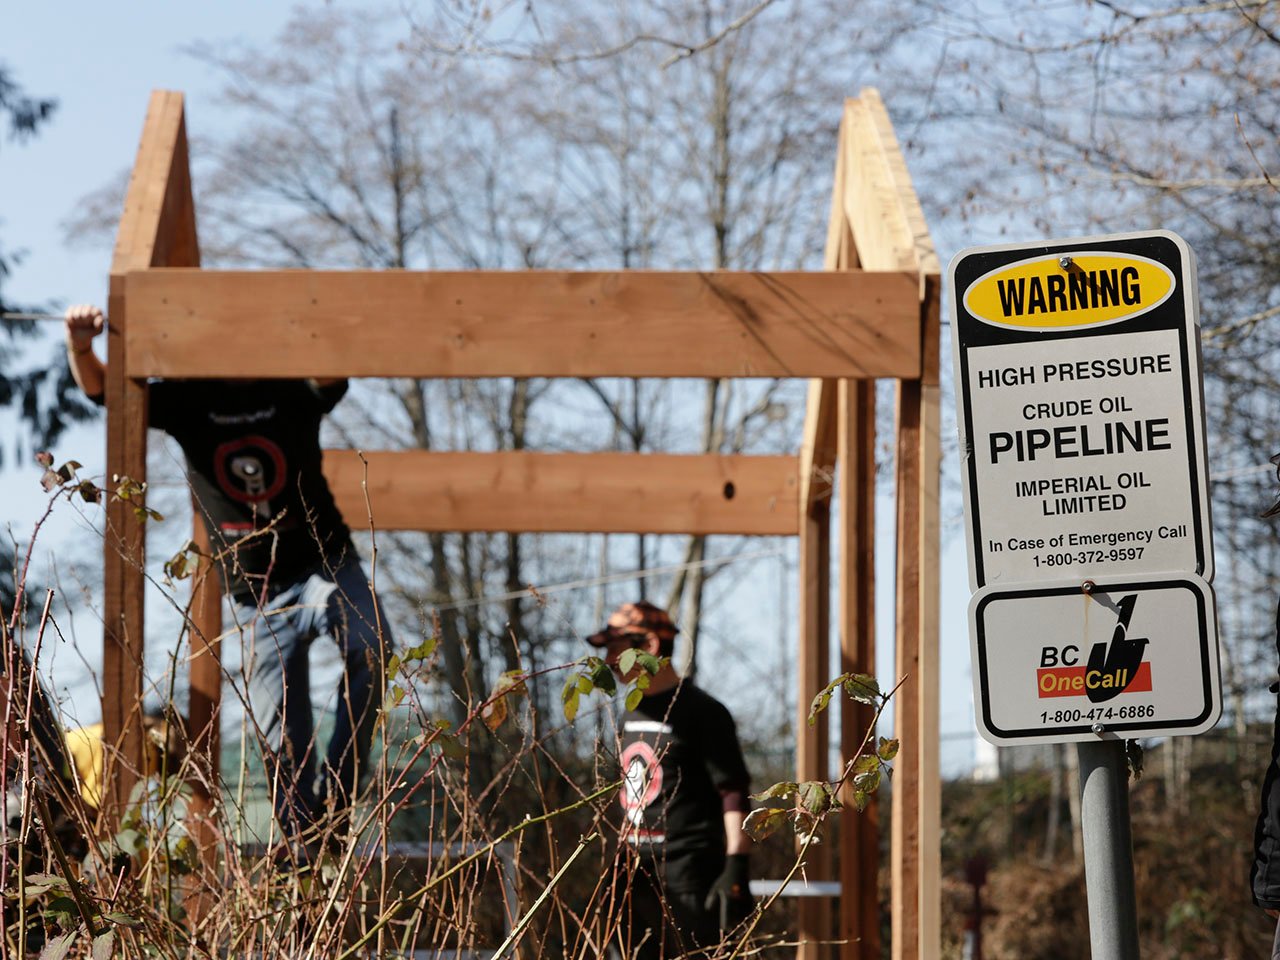 Everything you need to know about pipelines in Canada: Two people build structure behind a crude oil pipeline warning sign